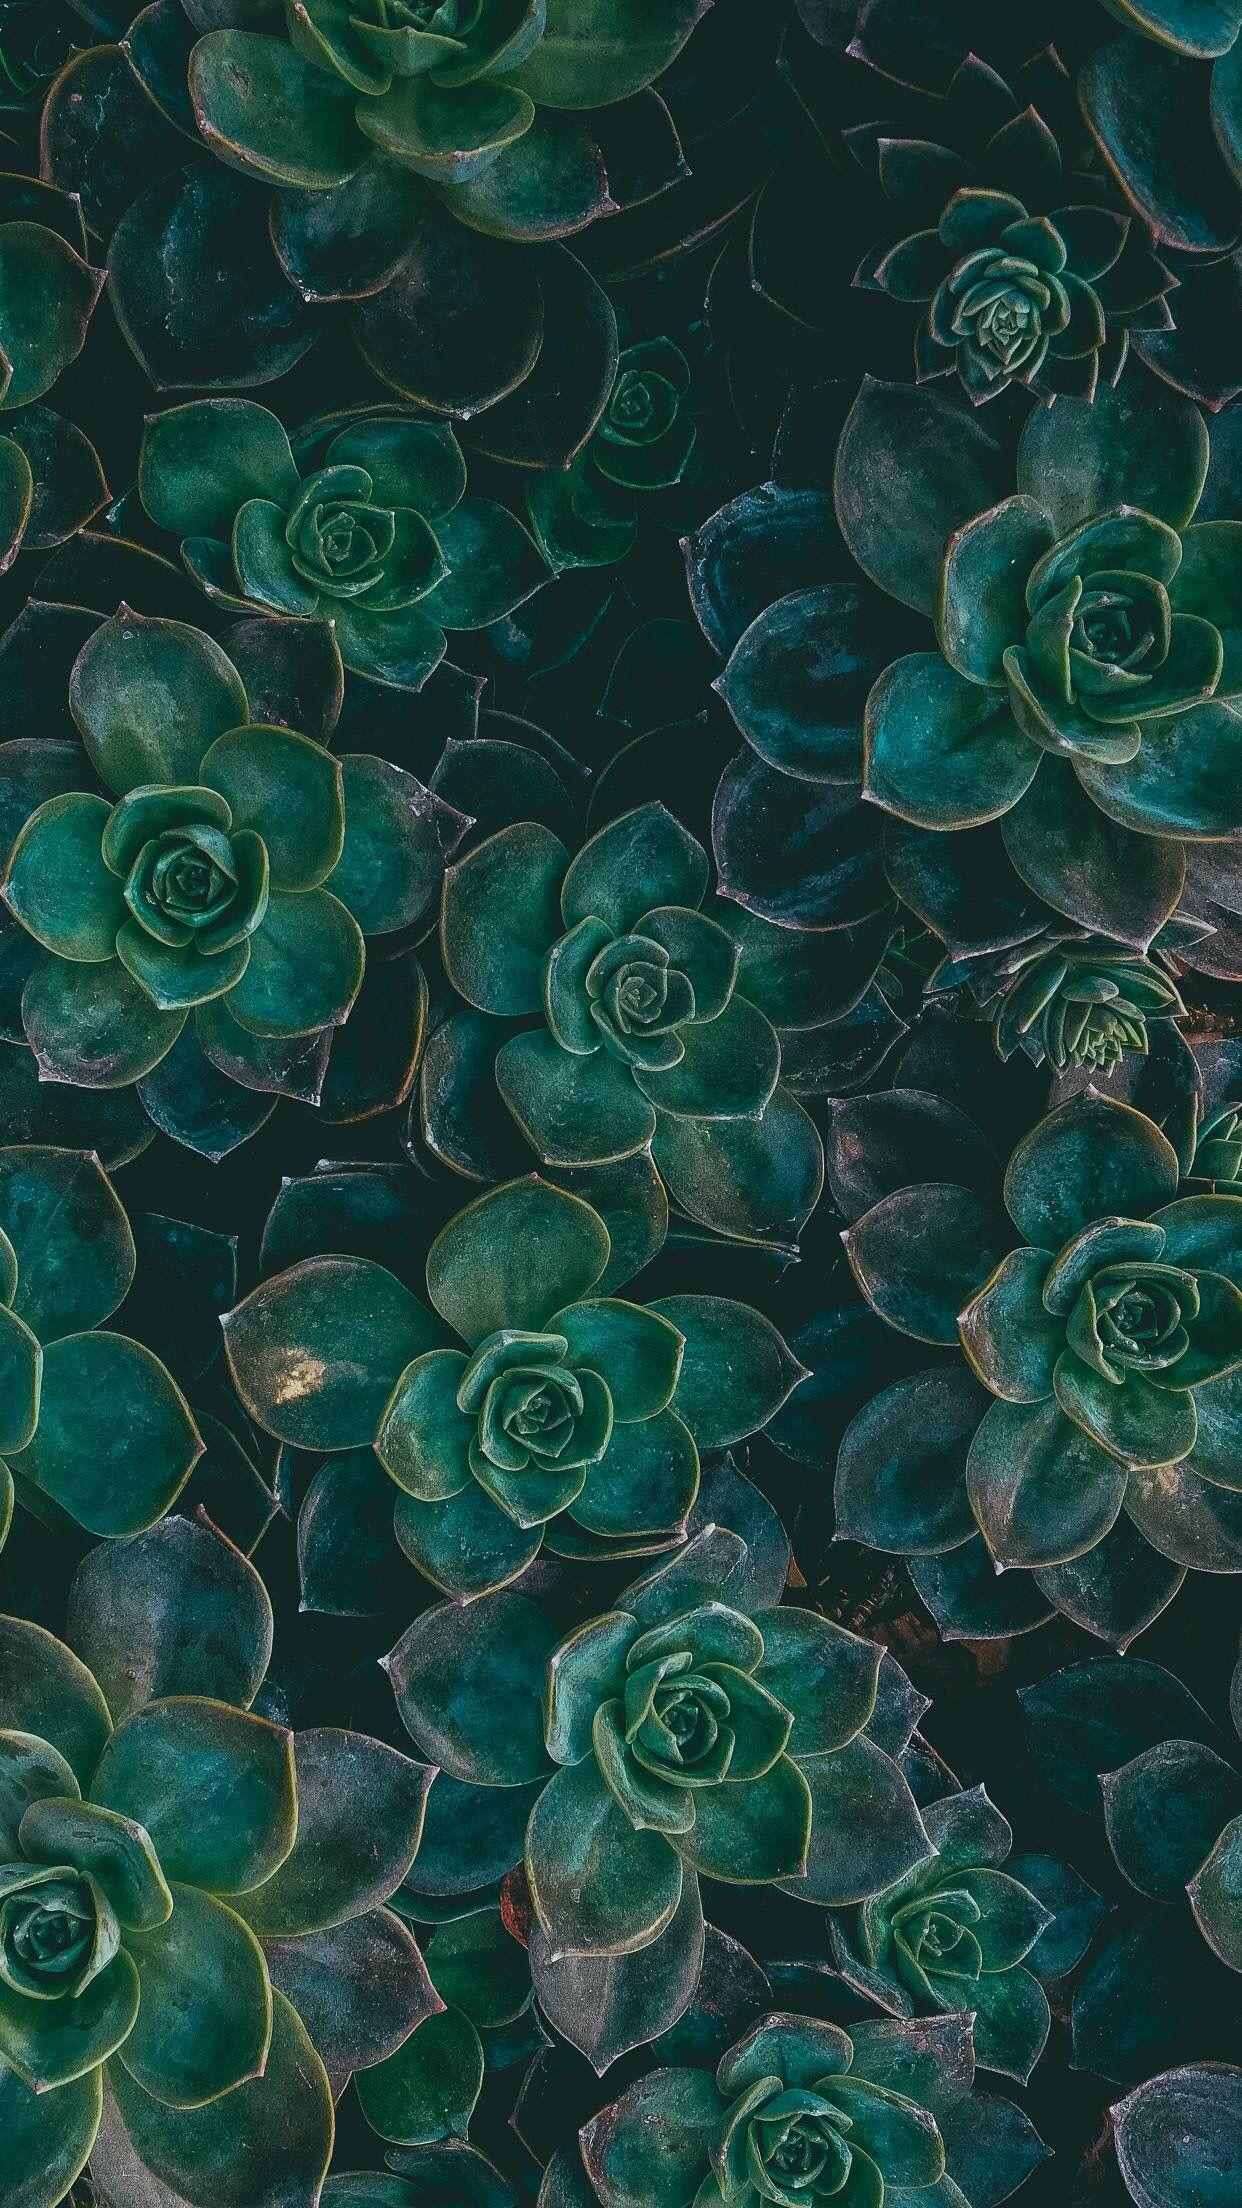 Succulent Iphone Wallpapers Wallpaper Cave Explore the r/iphonewallpapers subreddit on imgur, the best place to discover awesome images and gifs. succulent iphone wallpapers wallpaper